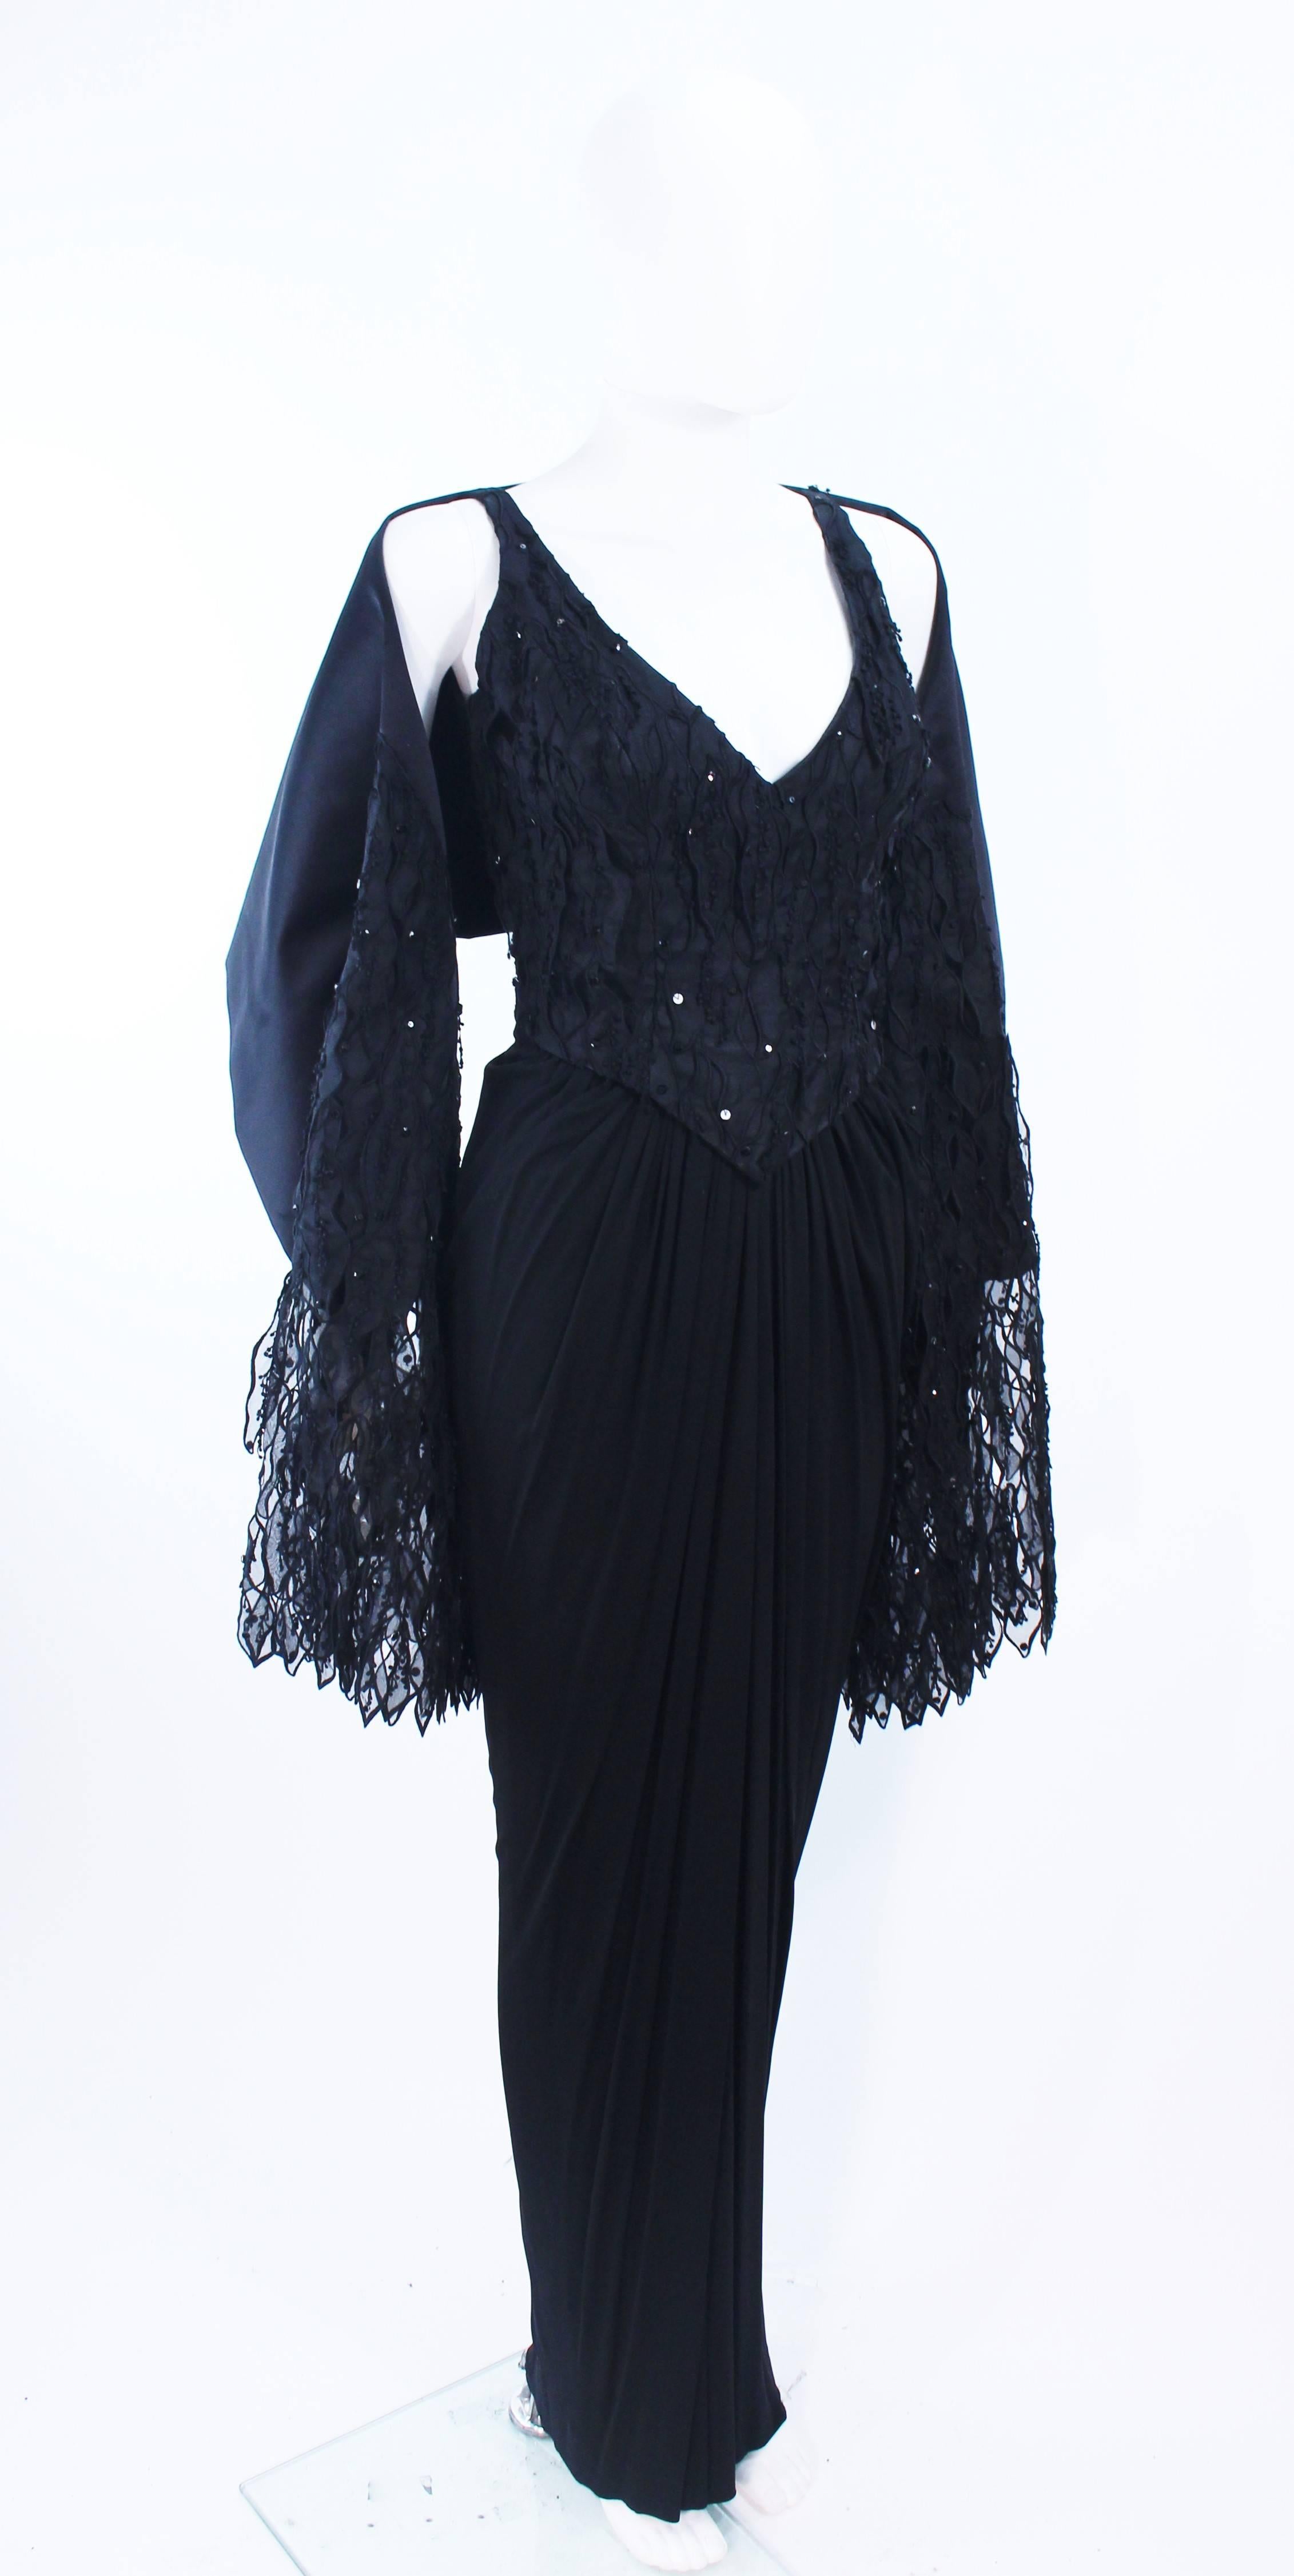 Women's Vintage 1960's Black Silk Jersey Gown with Floral Applique & Rhinestones Size 4 For Sale